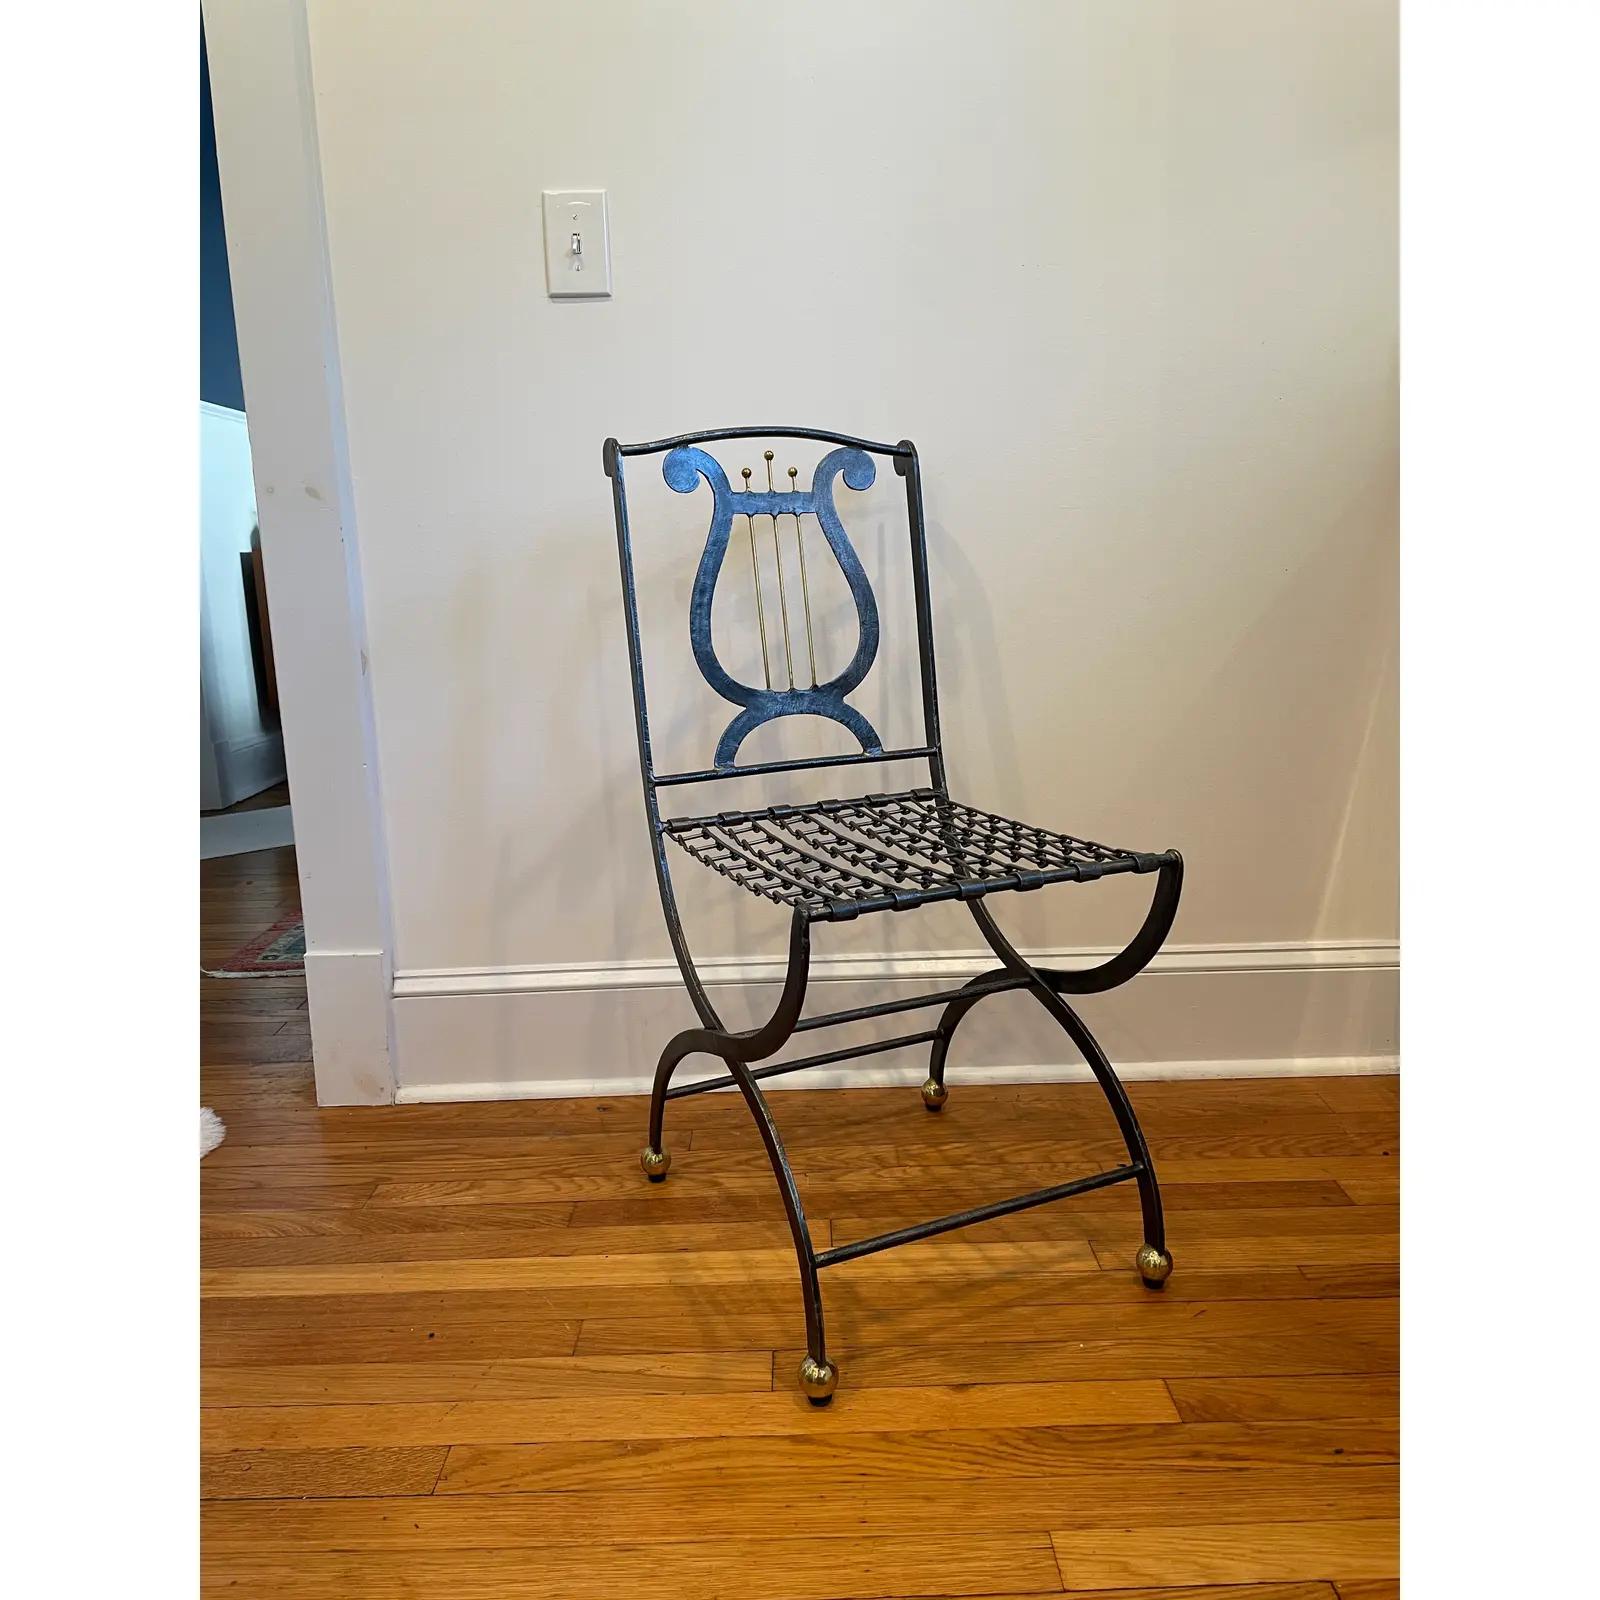 Unique Maitland Smith Folding Iron Chair with Lyre Back Motif. Chain link seat webbing. Capped off with brass ball feet and Lyre accent.
Curbside to NYC/Philly $400